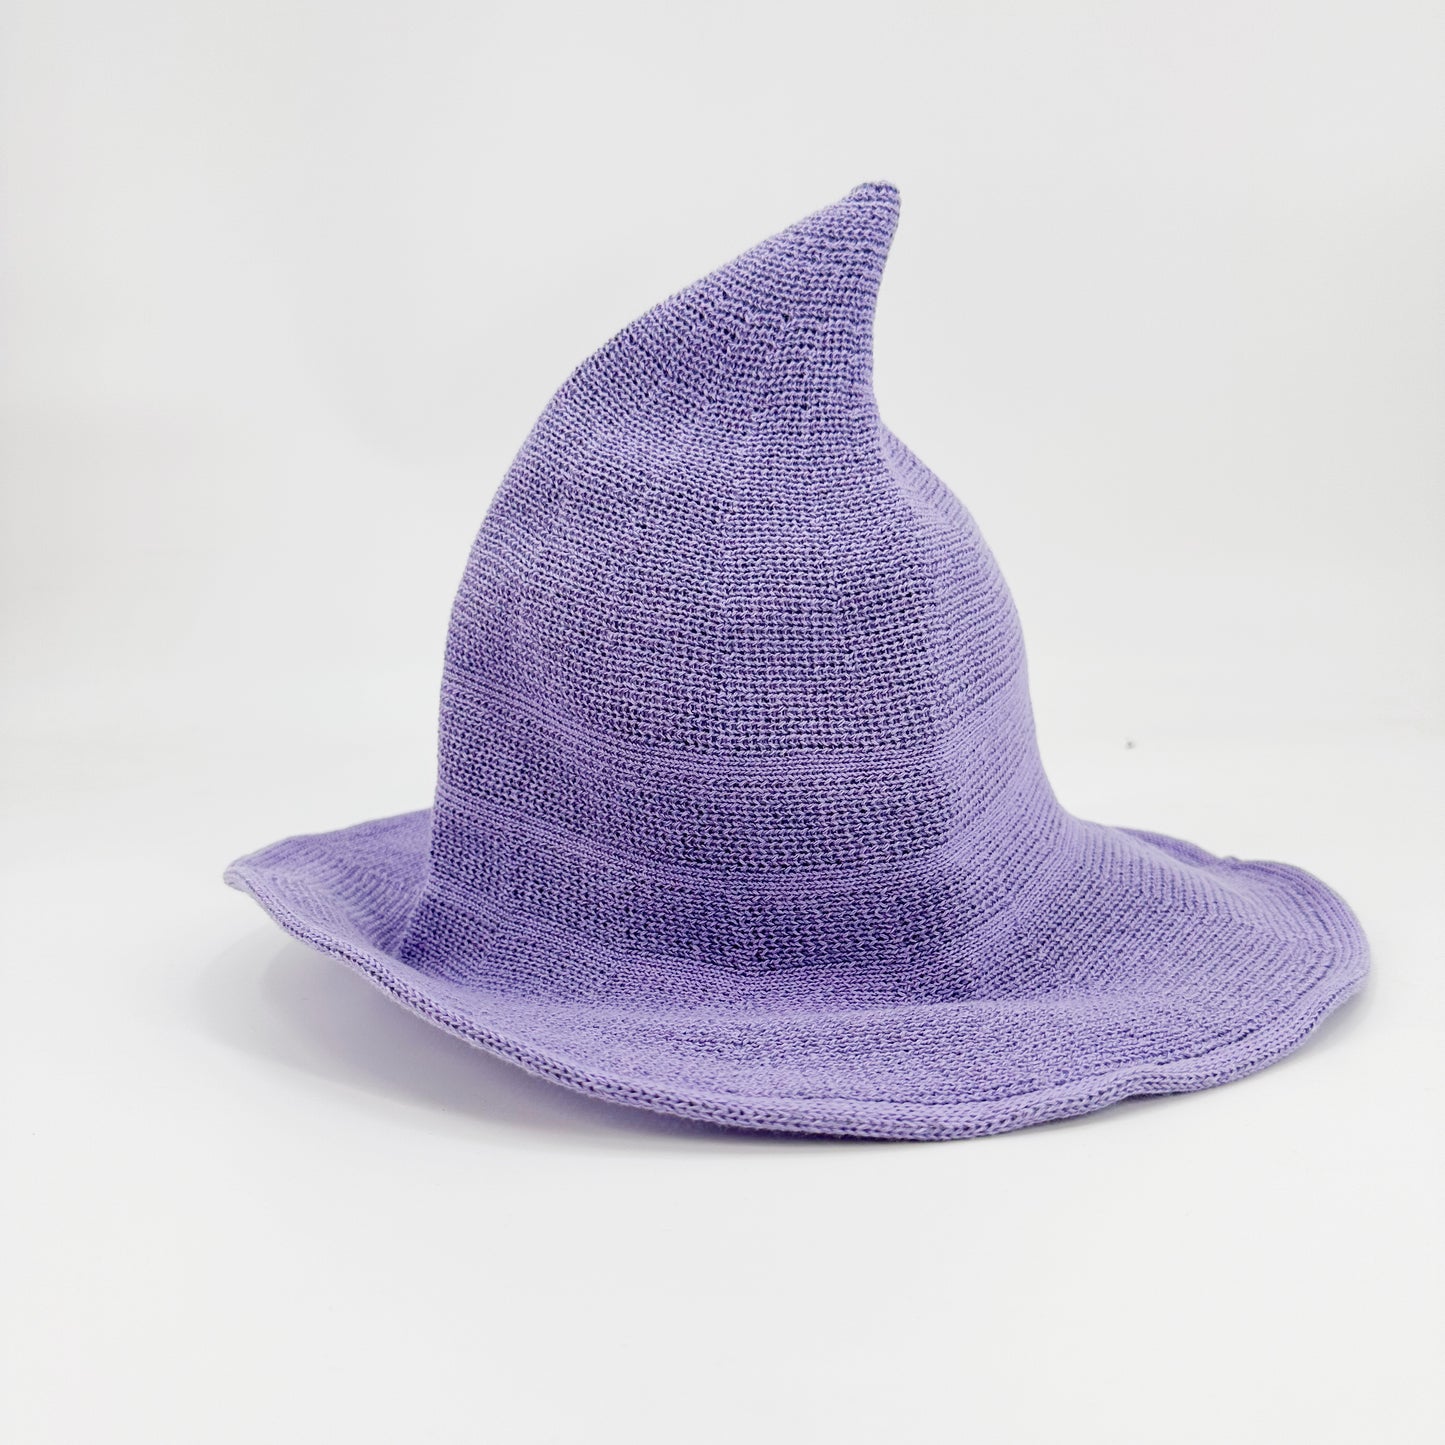 Oversized Witch Hats